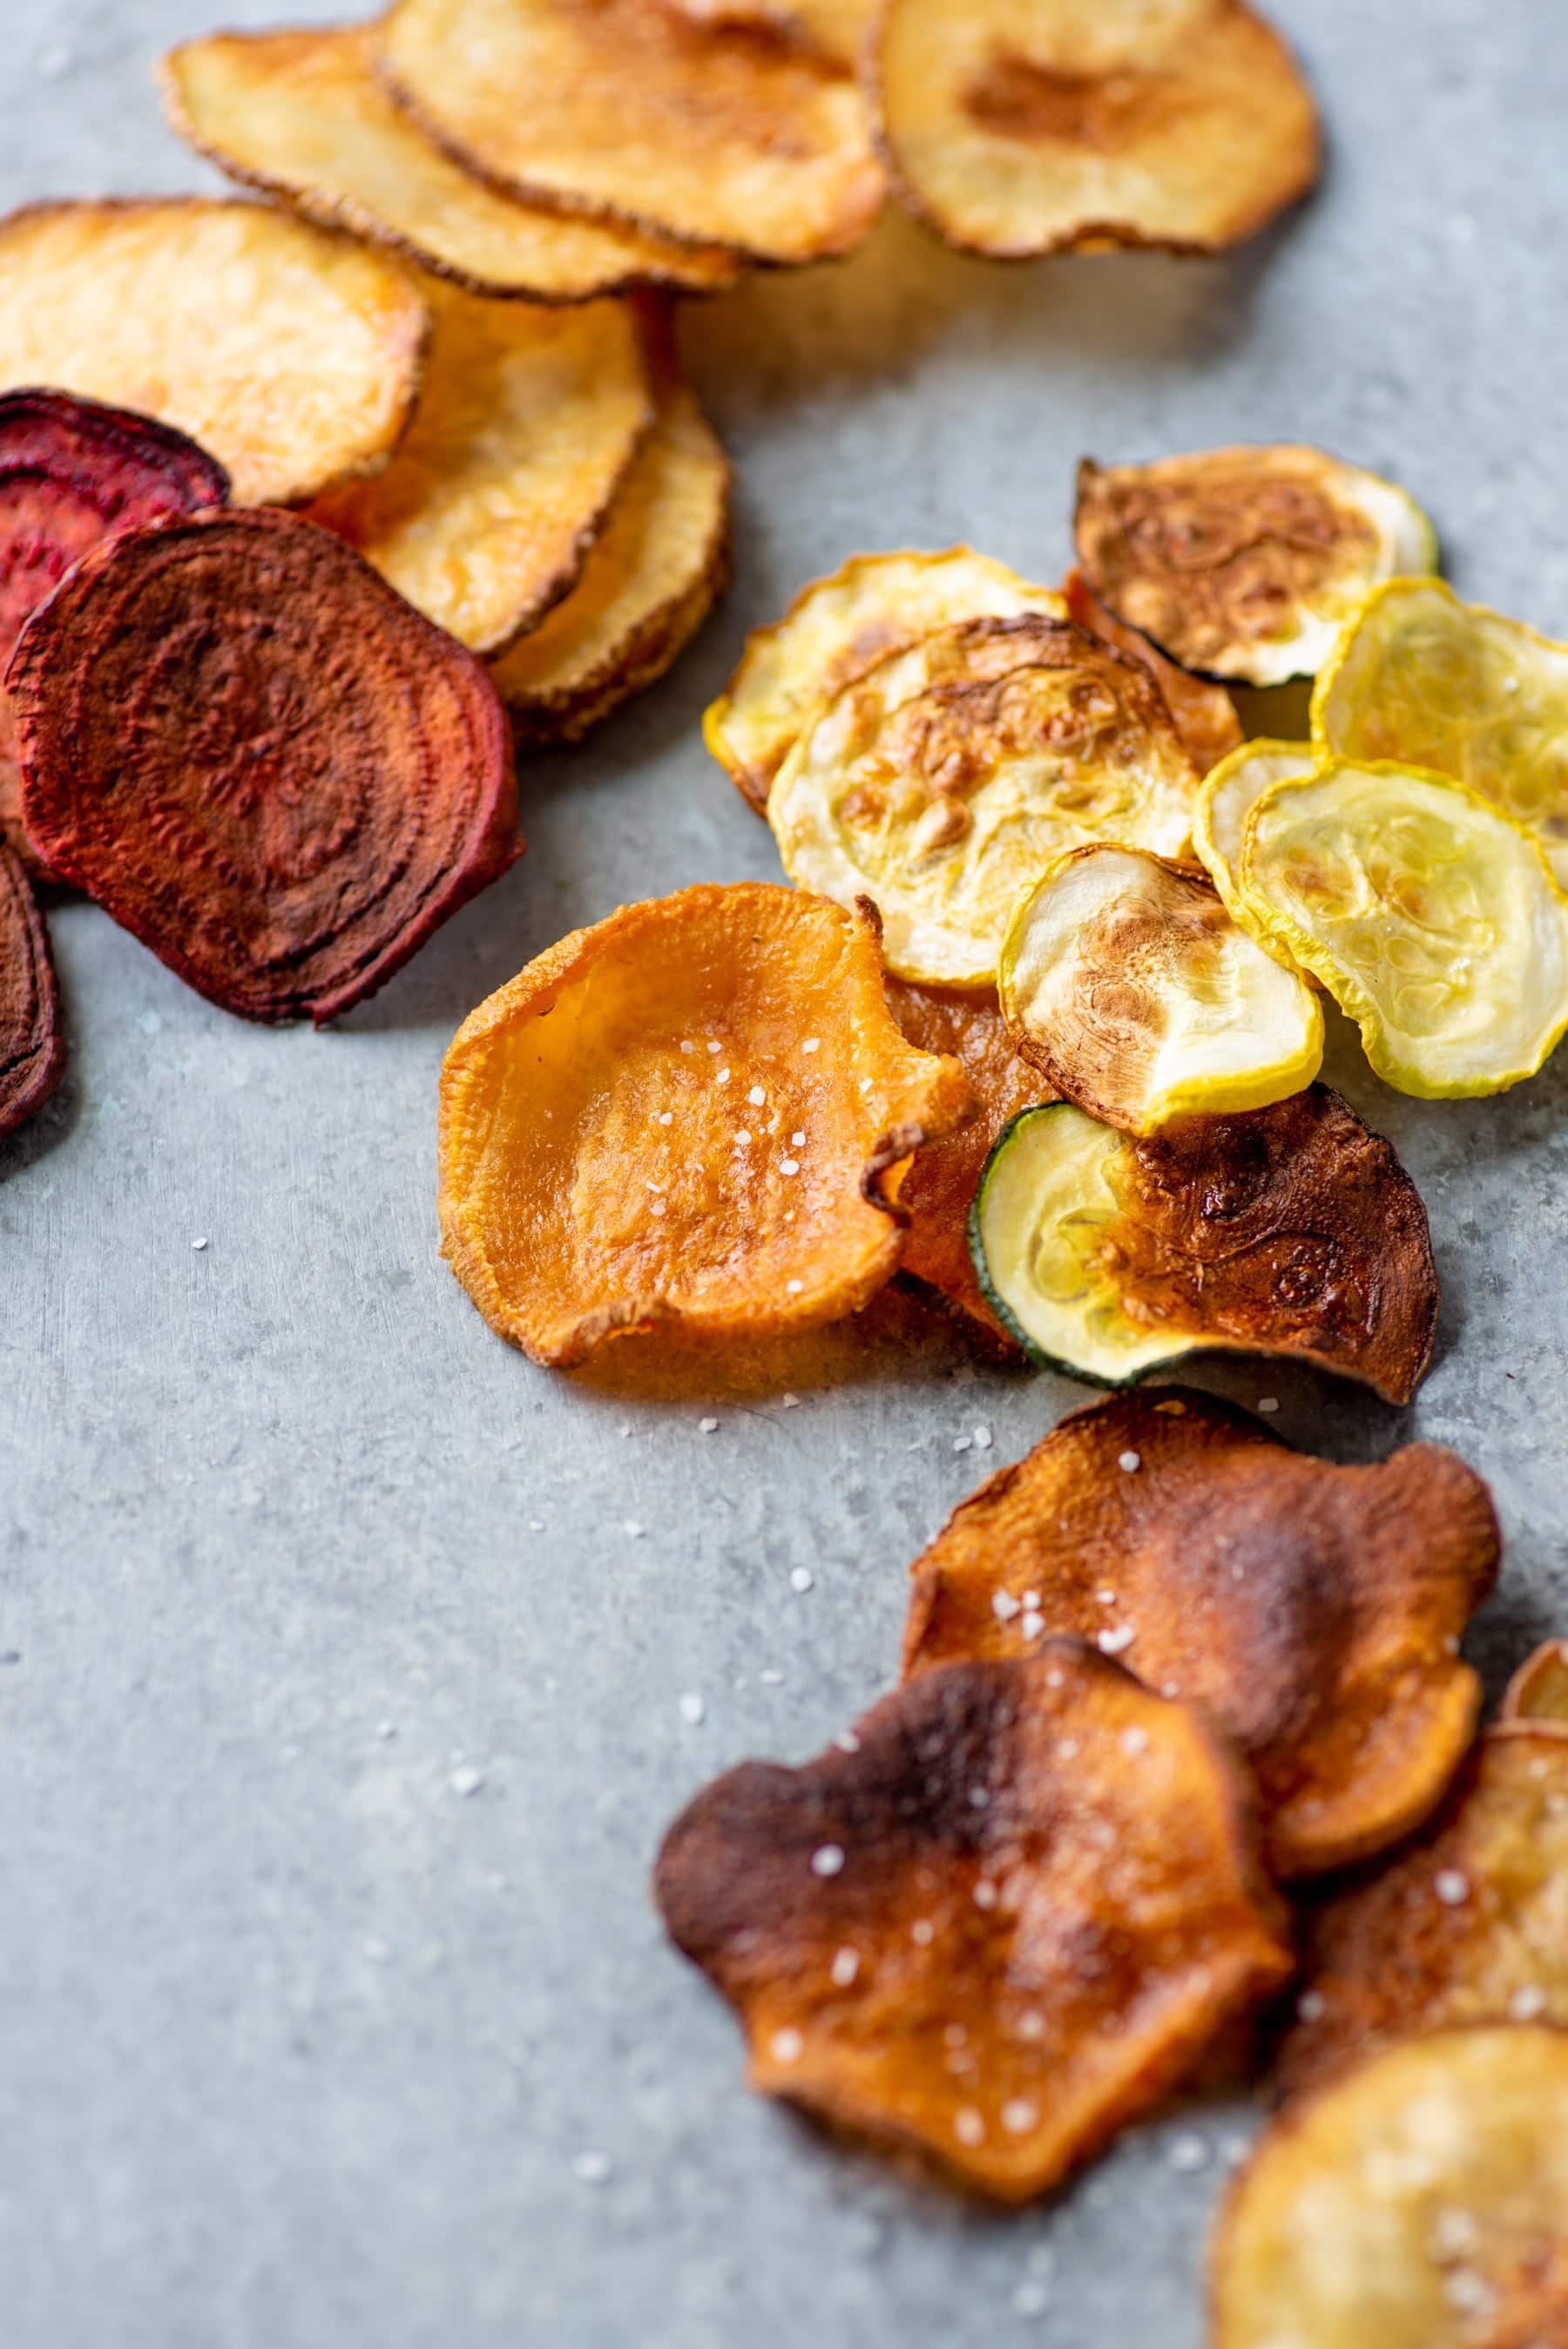 Baked vegetable chips spread out on a grey background